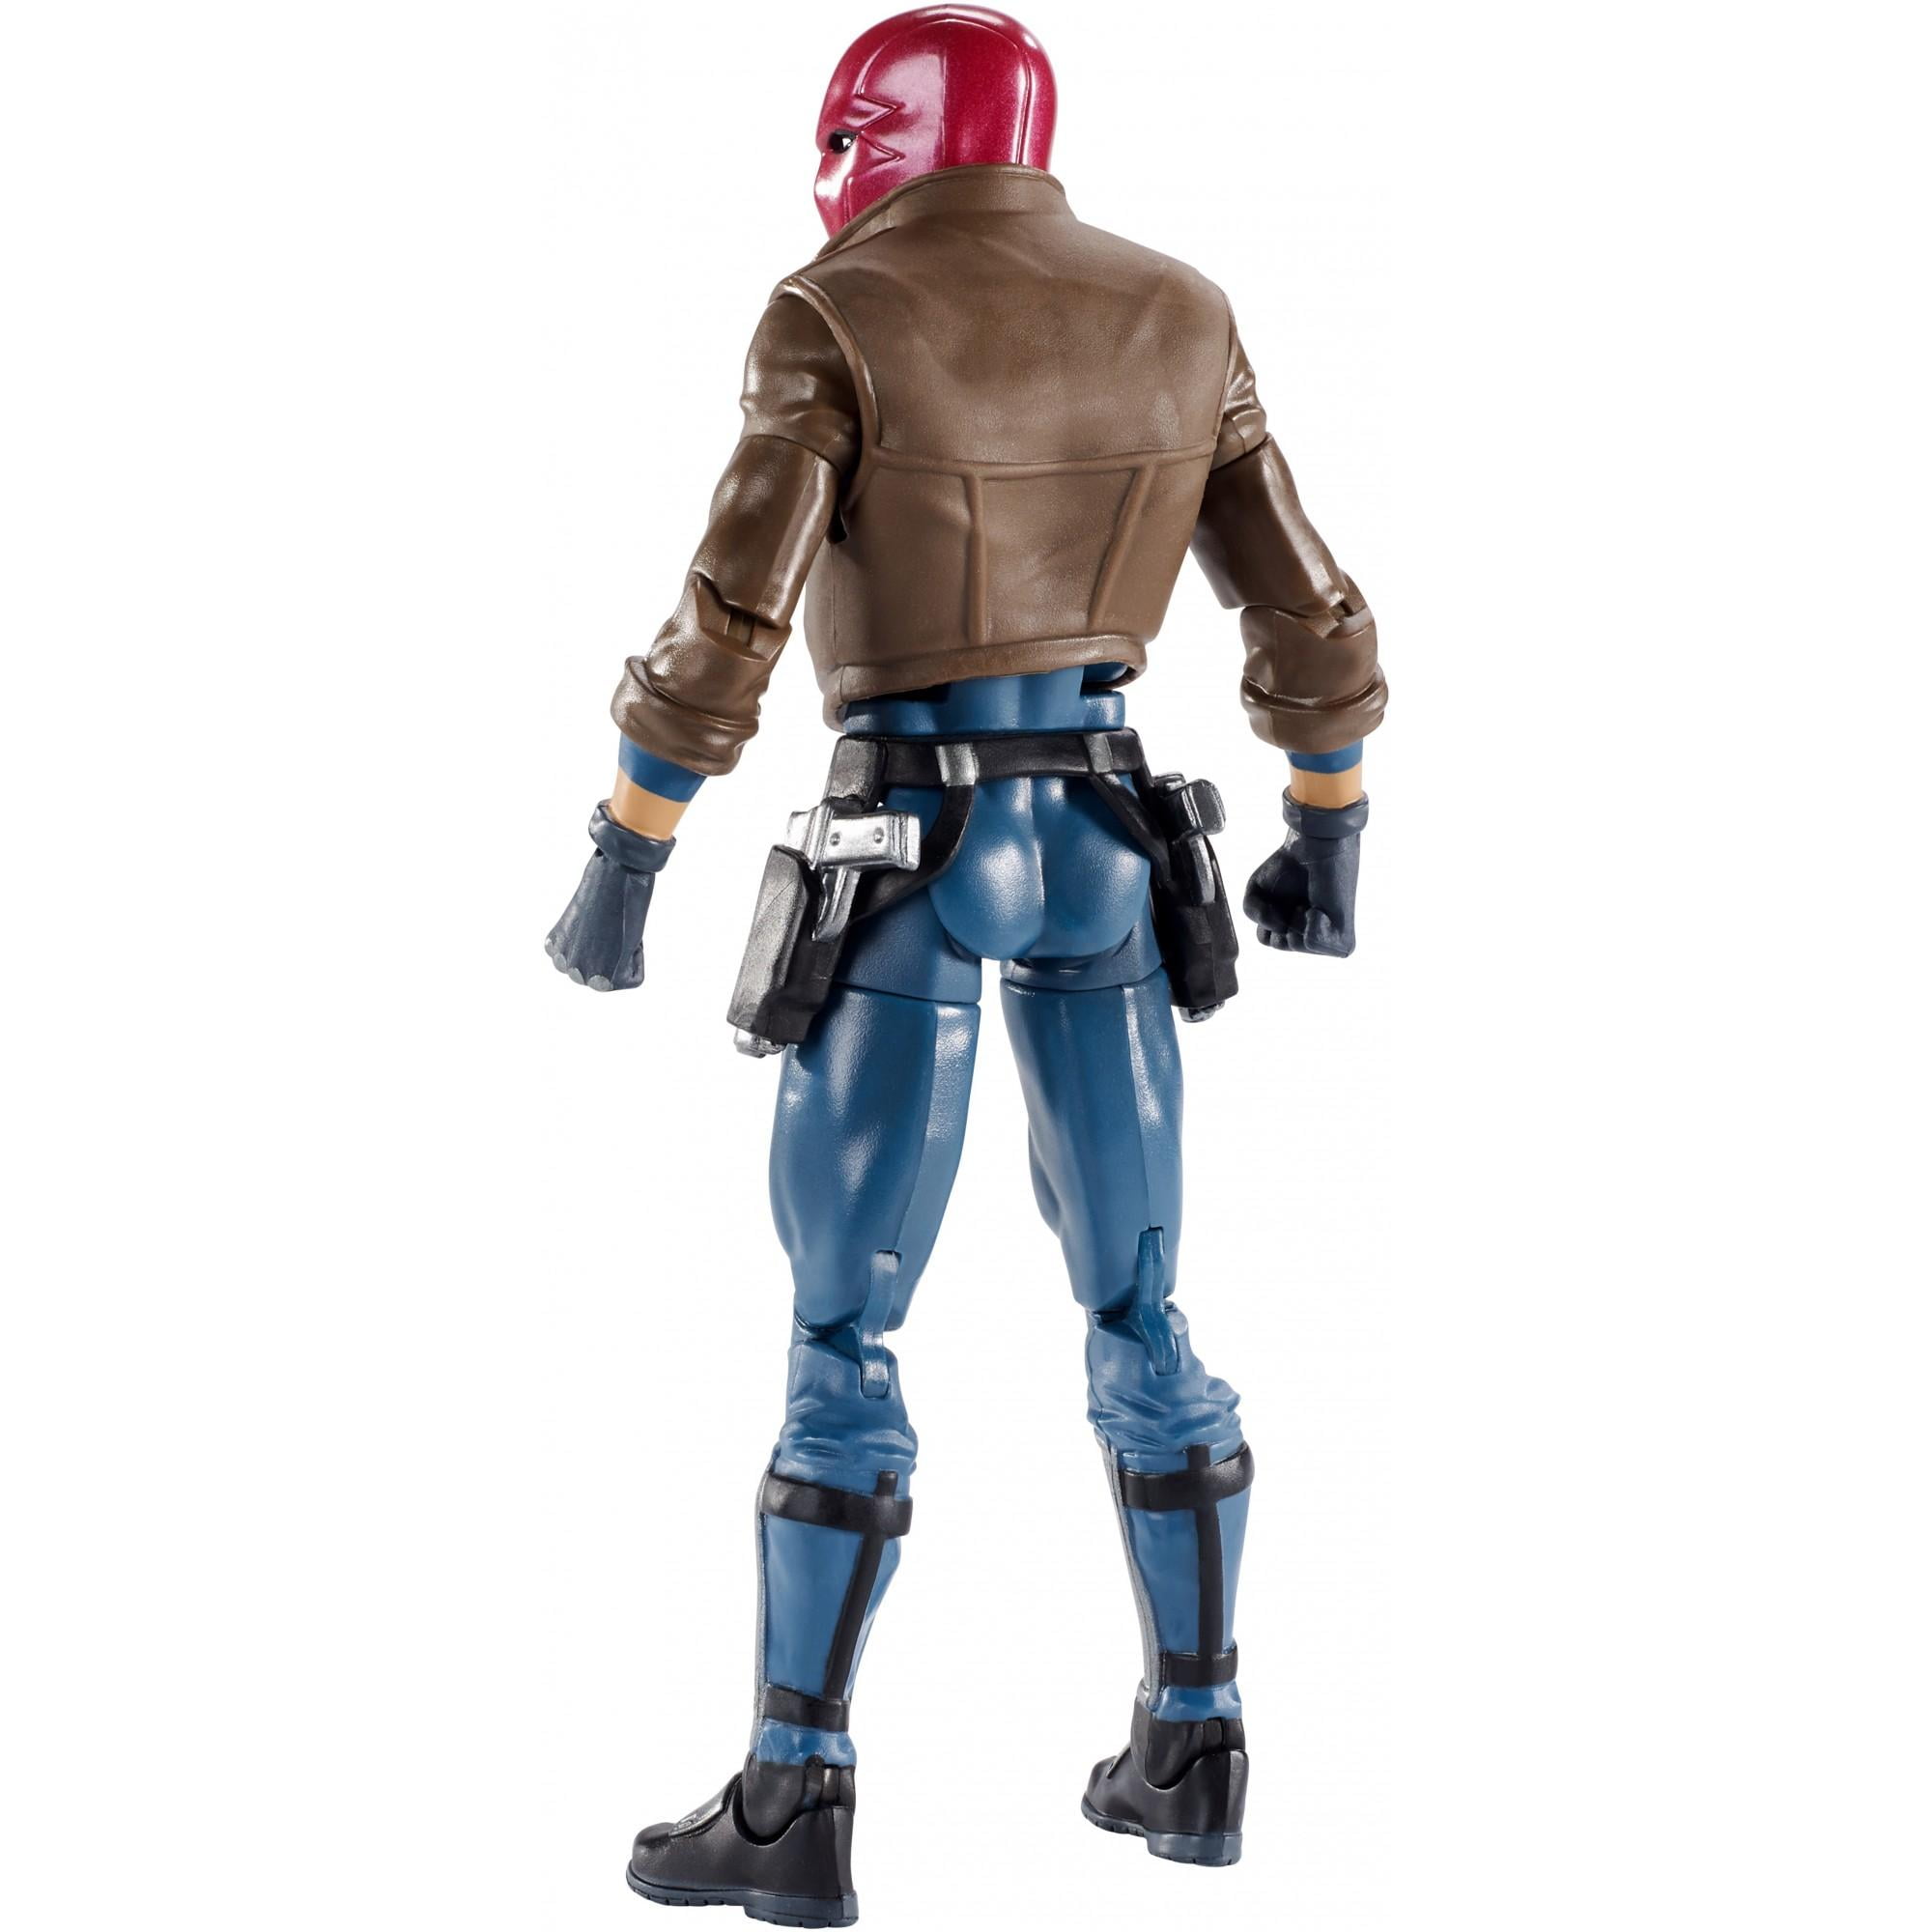 red hood action figure